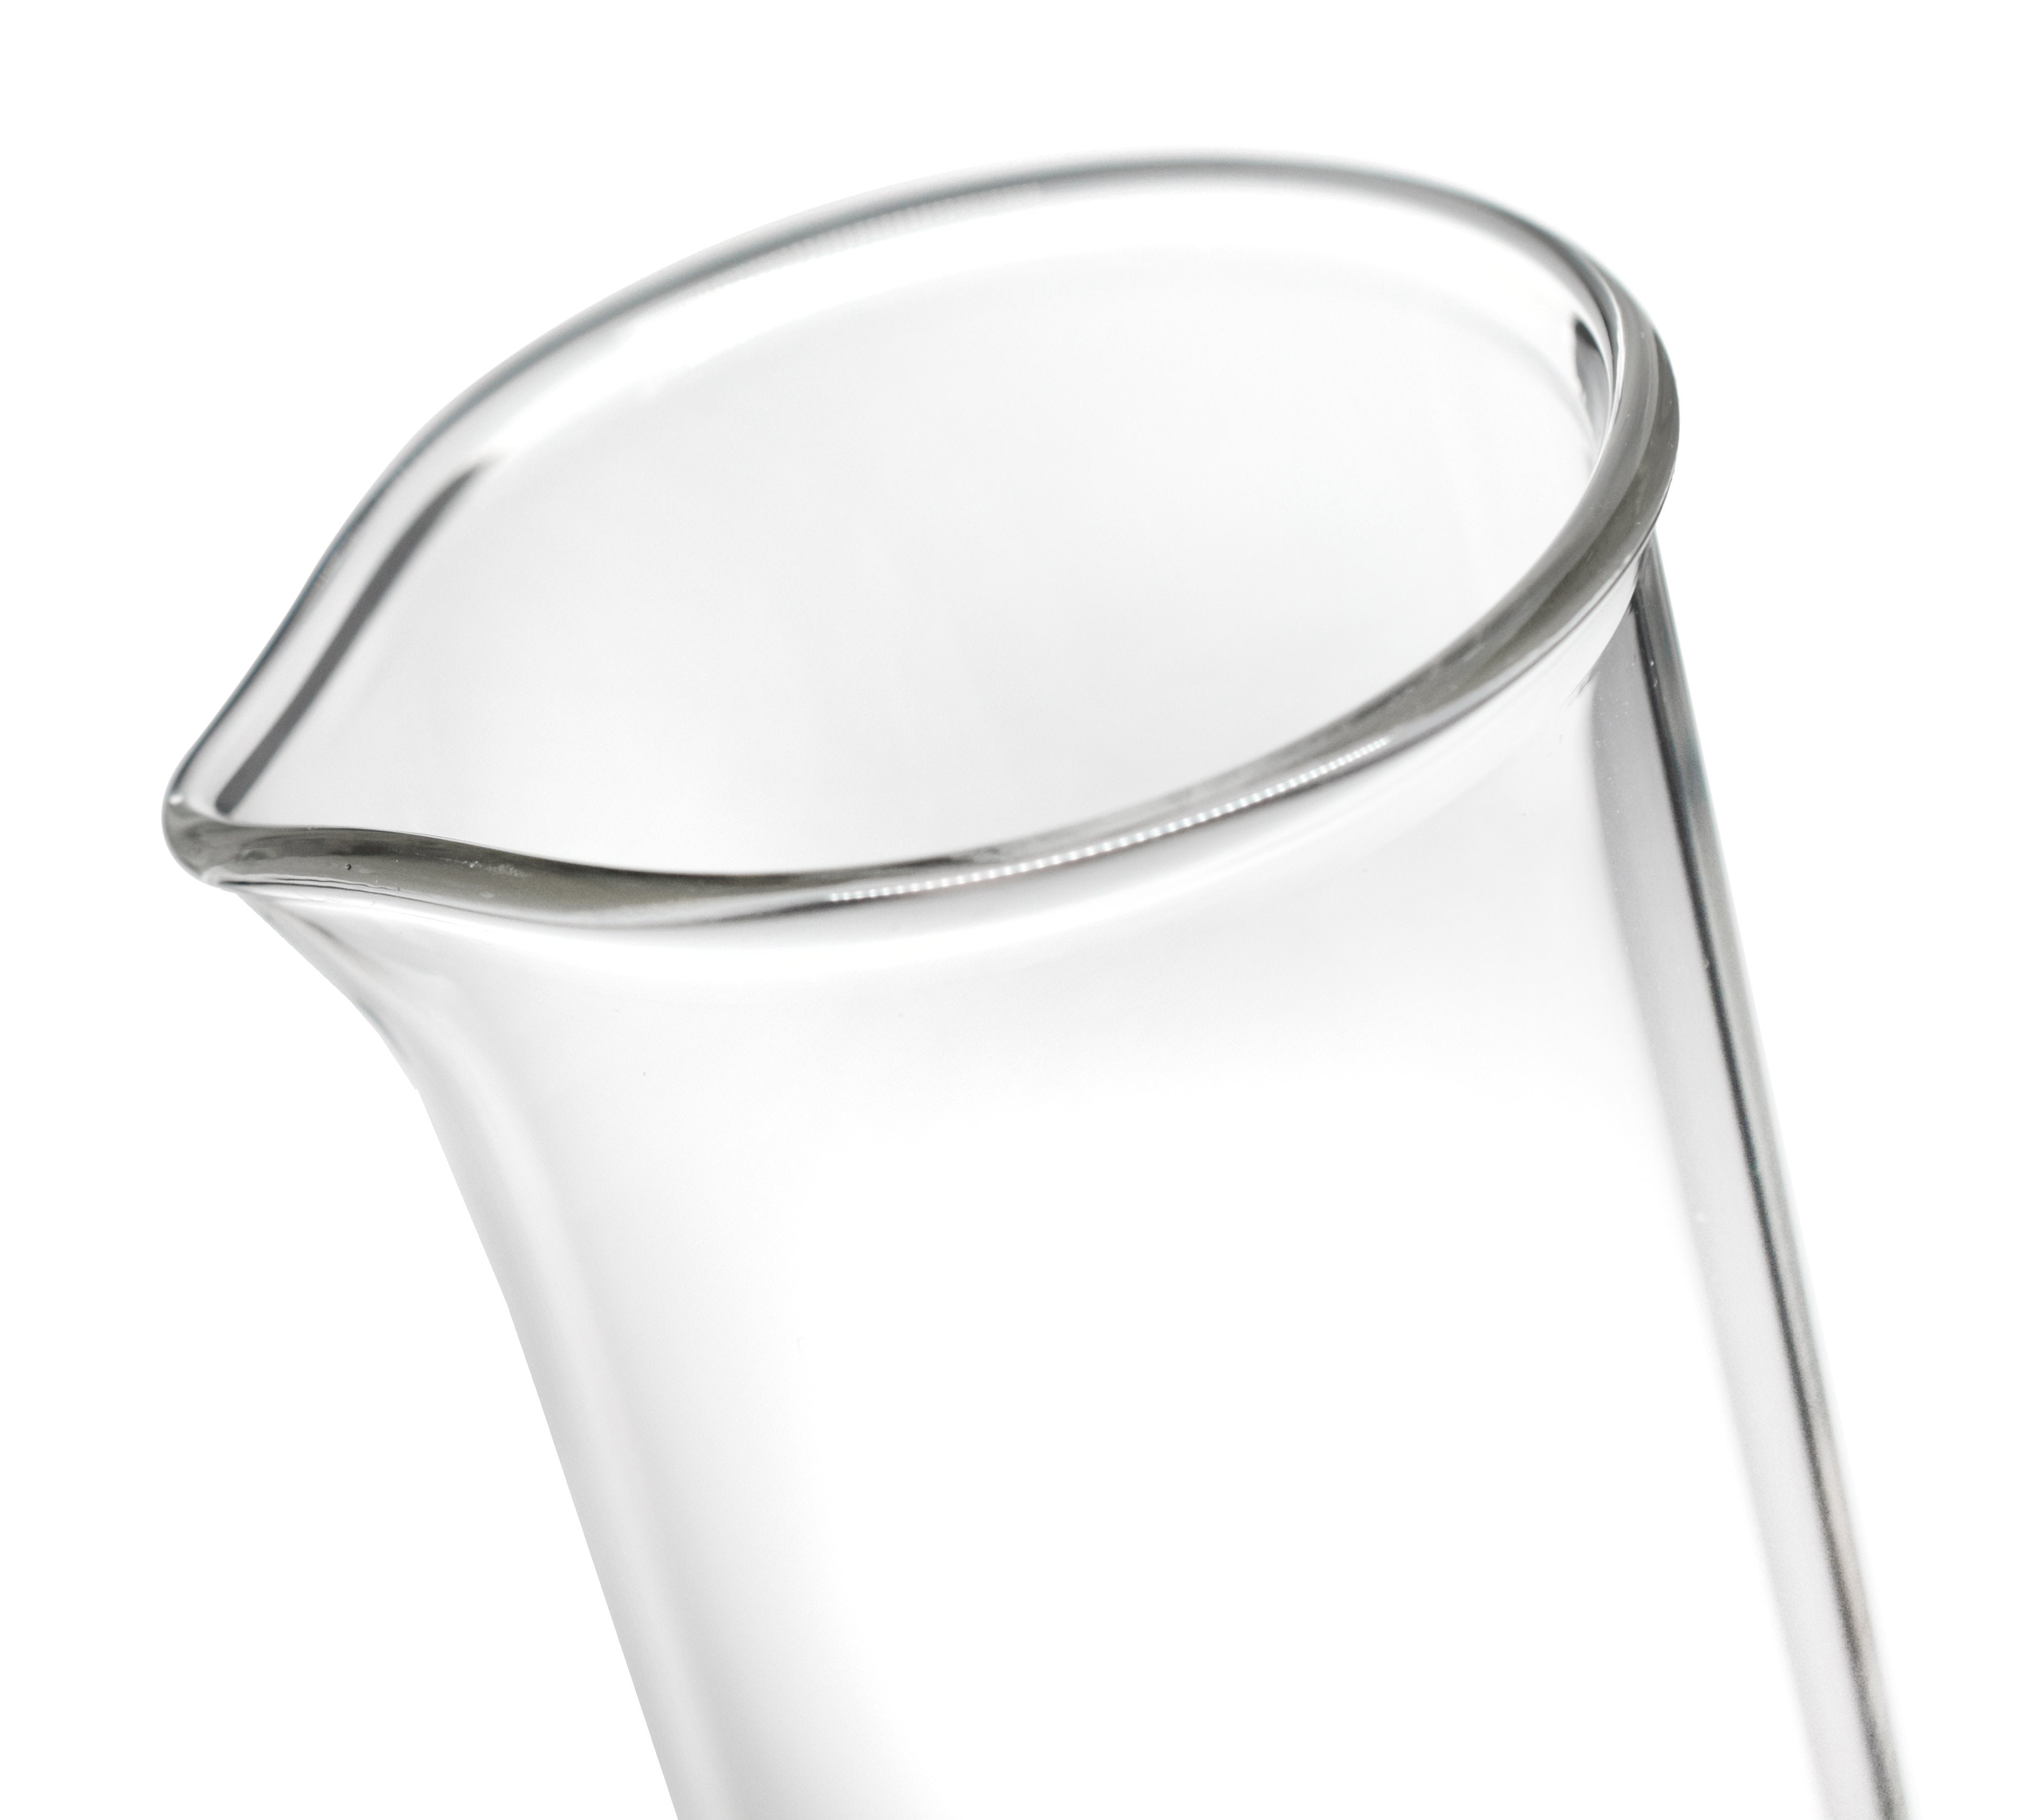 Borosilicate Glass Graduated Cylinder with Guard, 2000 ml, 20.0 ml Graduation, Class A, ASTM, Autoclavable